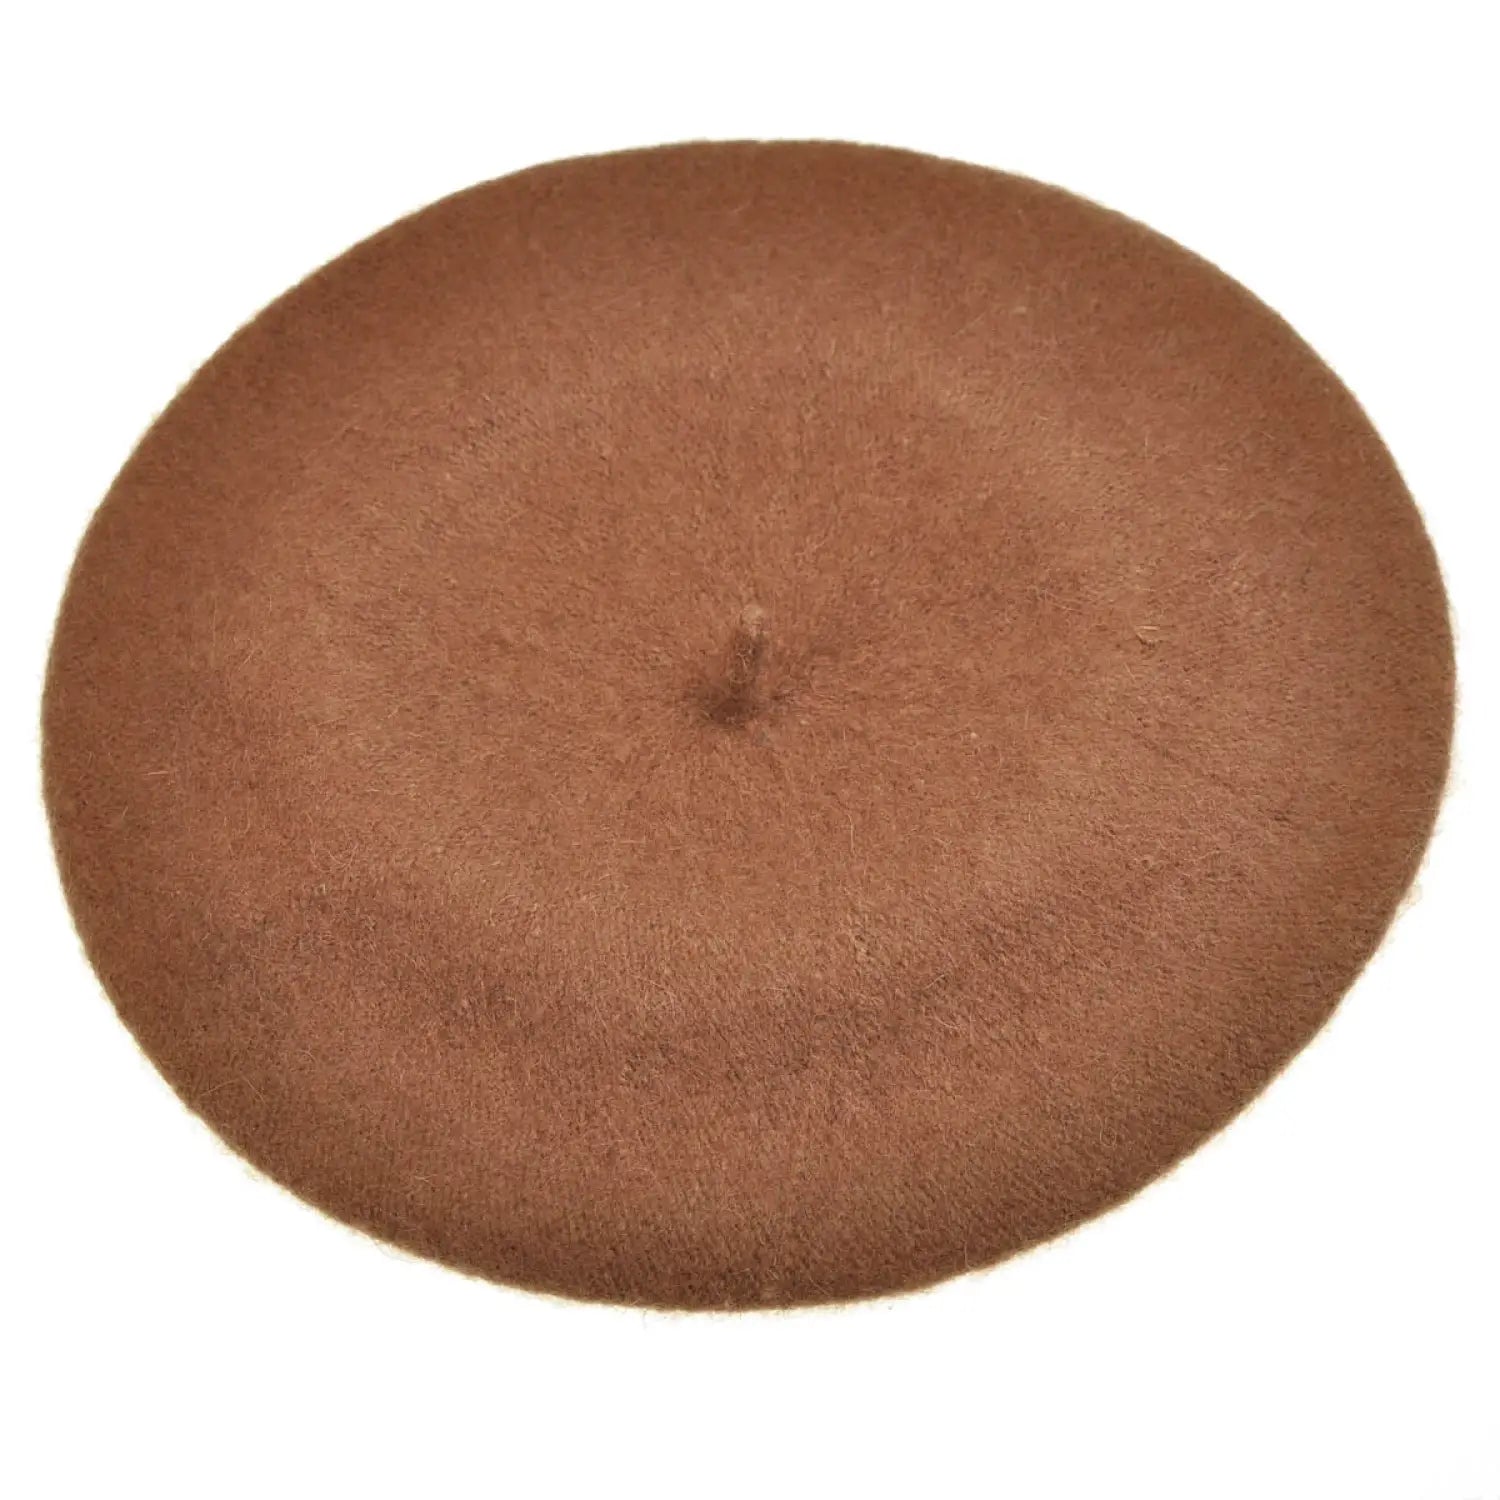 French wool beret in elegant brown color.